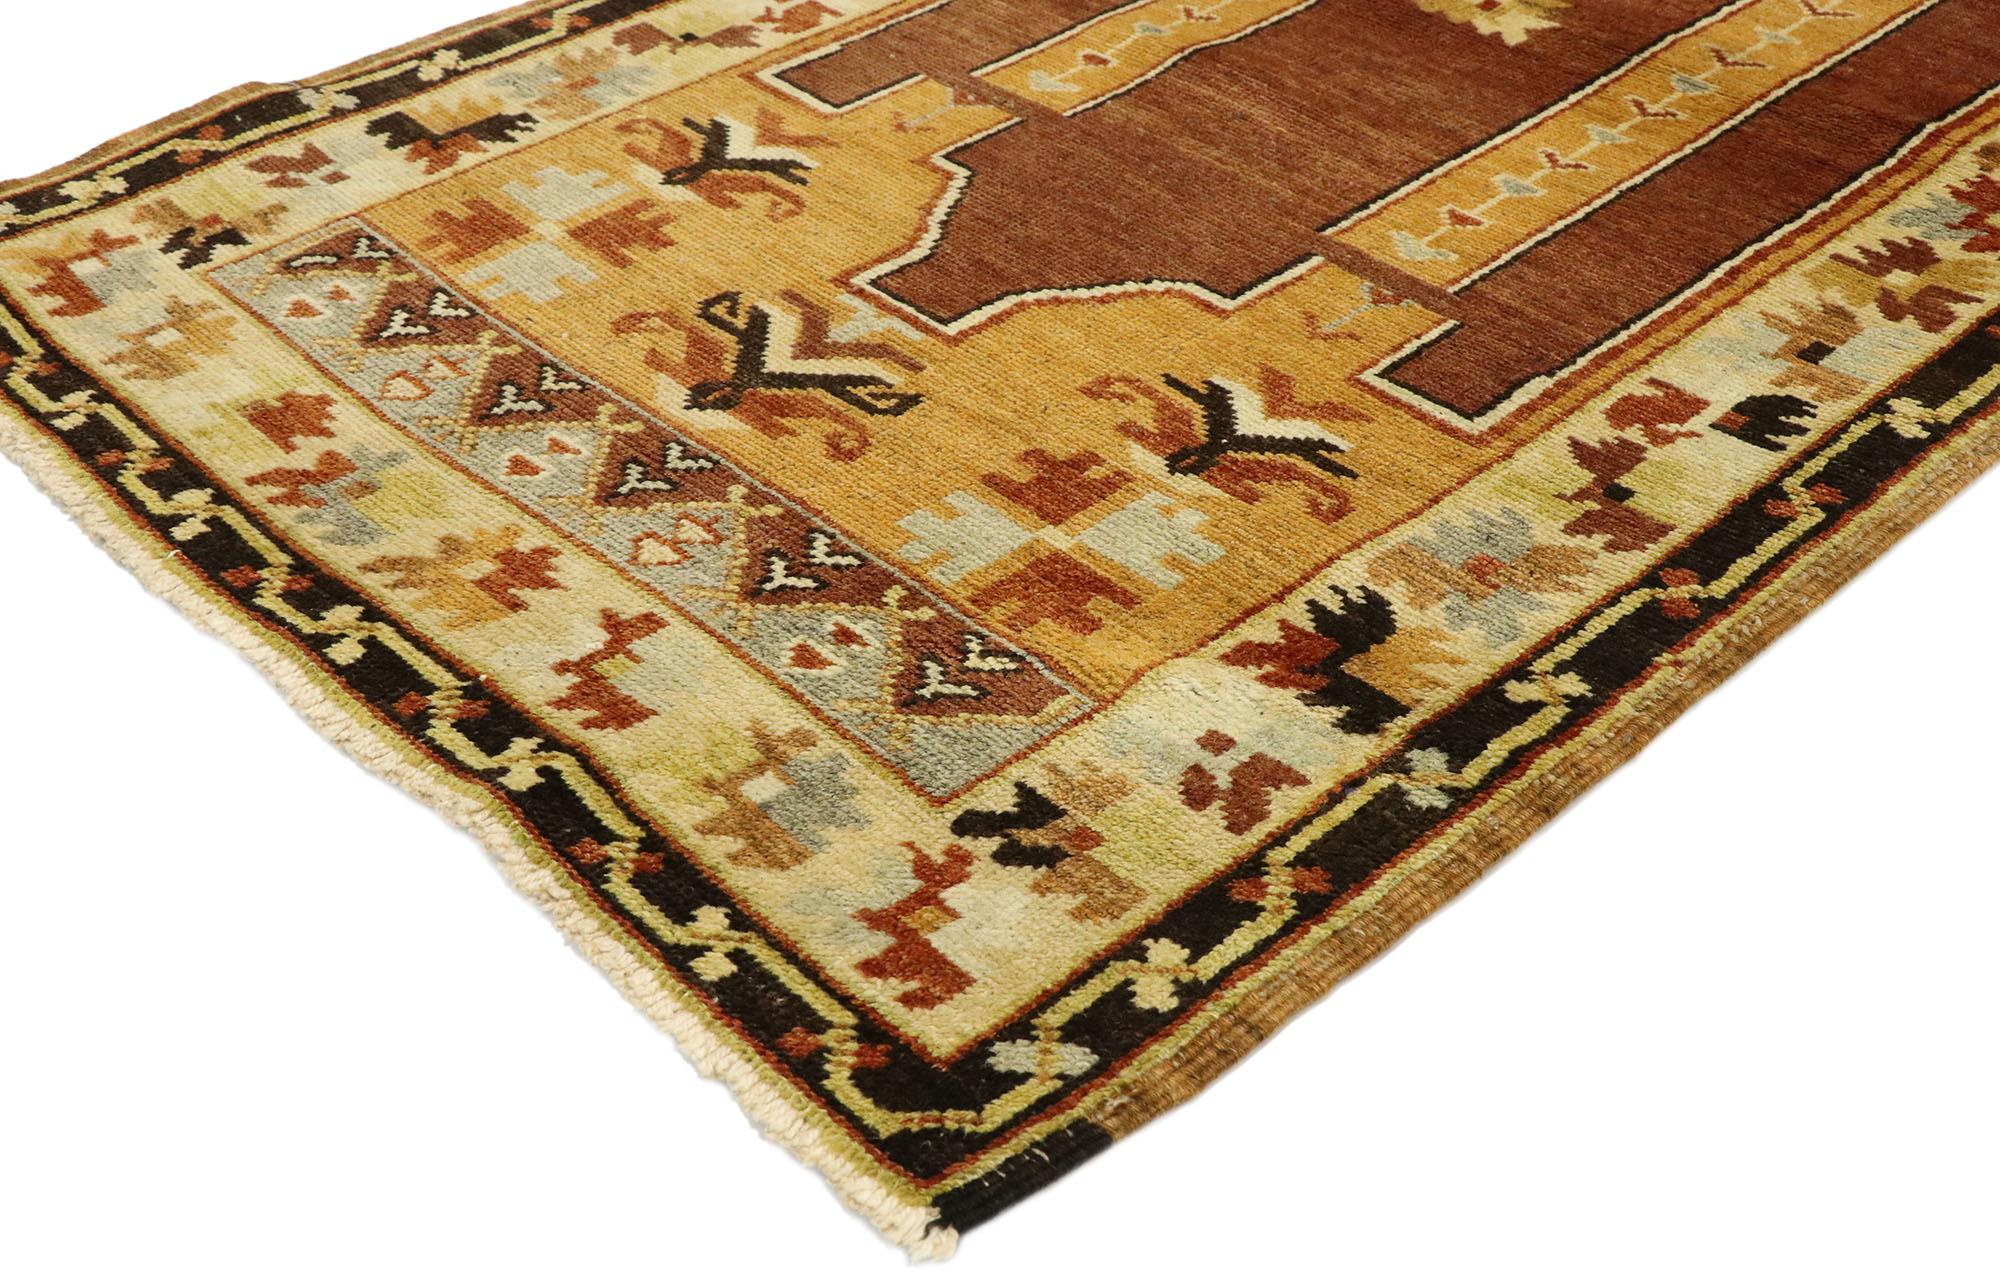 50118, vintage Turkish Oushak Prayer rug with Mid-Century Modern style. Warm and inviting, this hand knotted wool vintage Turkish Oushak prayer rug is poised to impress. It features a double mihrab niche with two columns dotted with a serrated motif